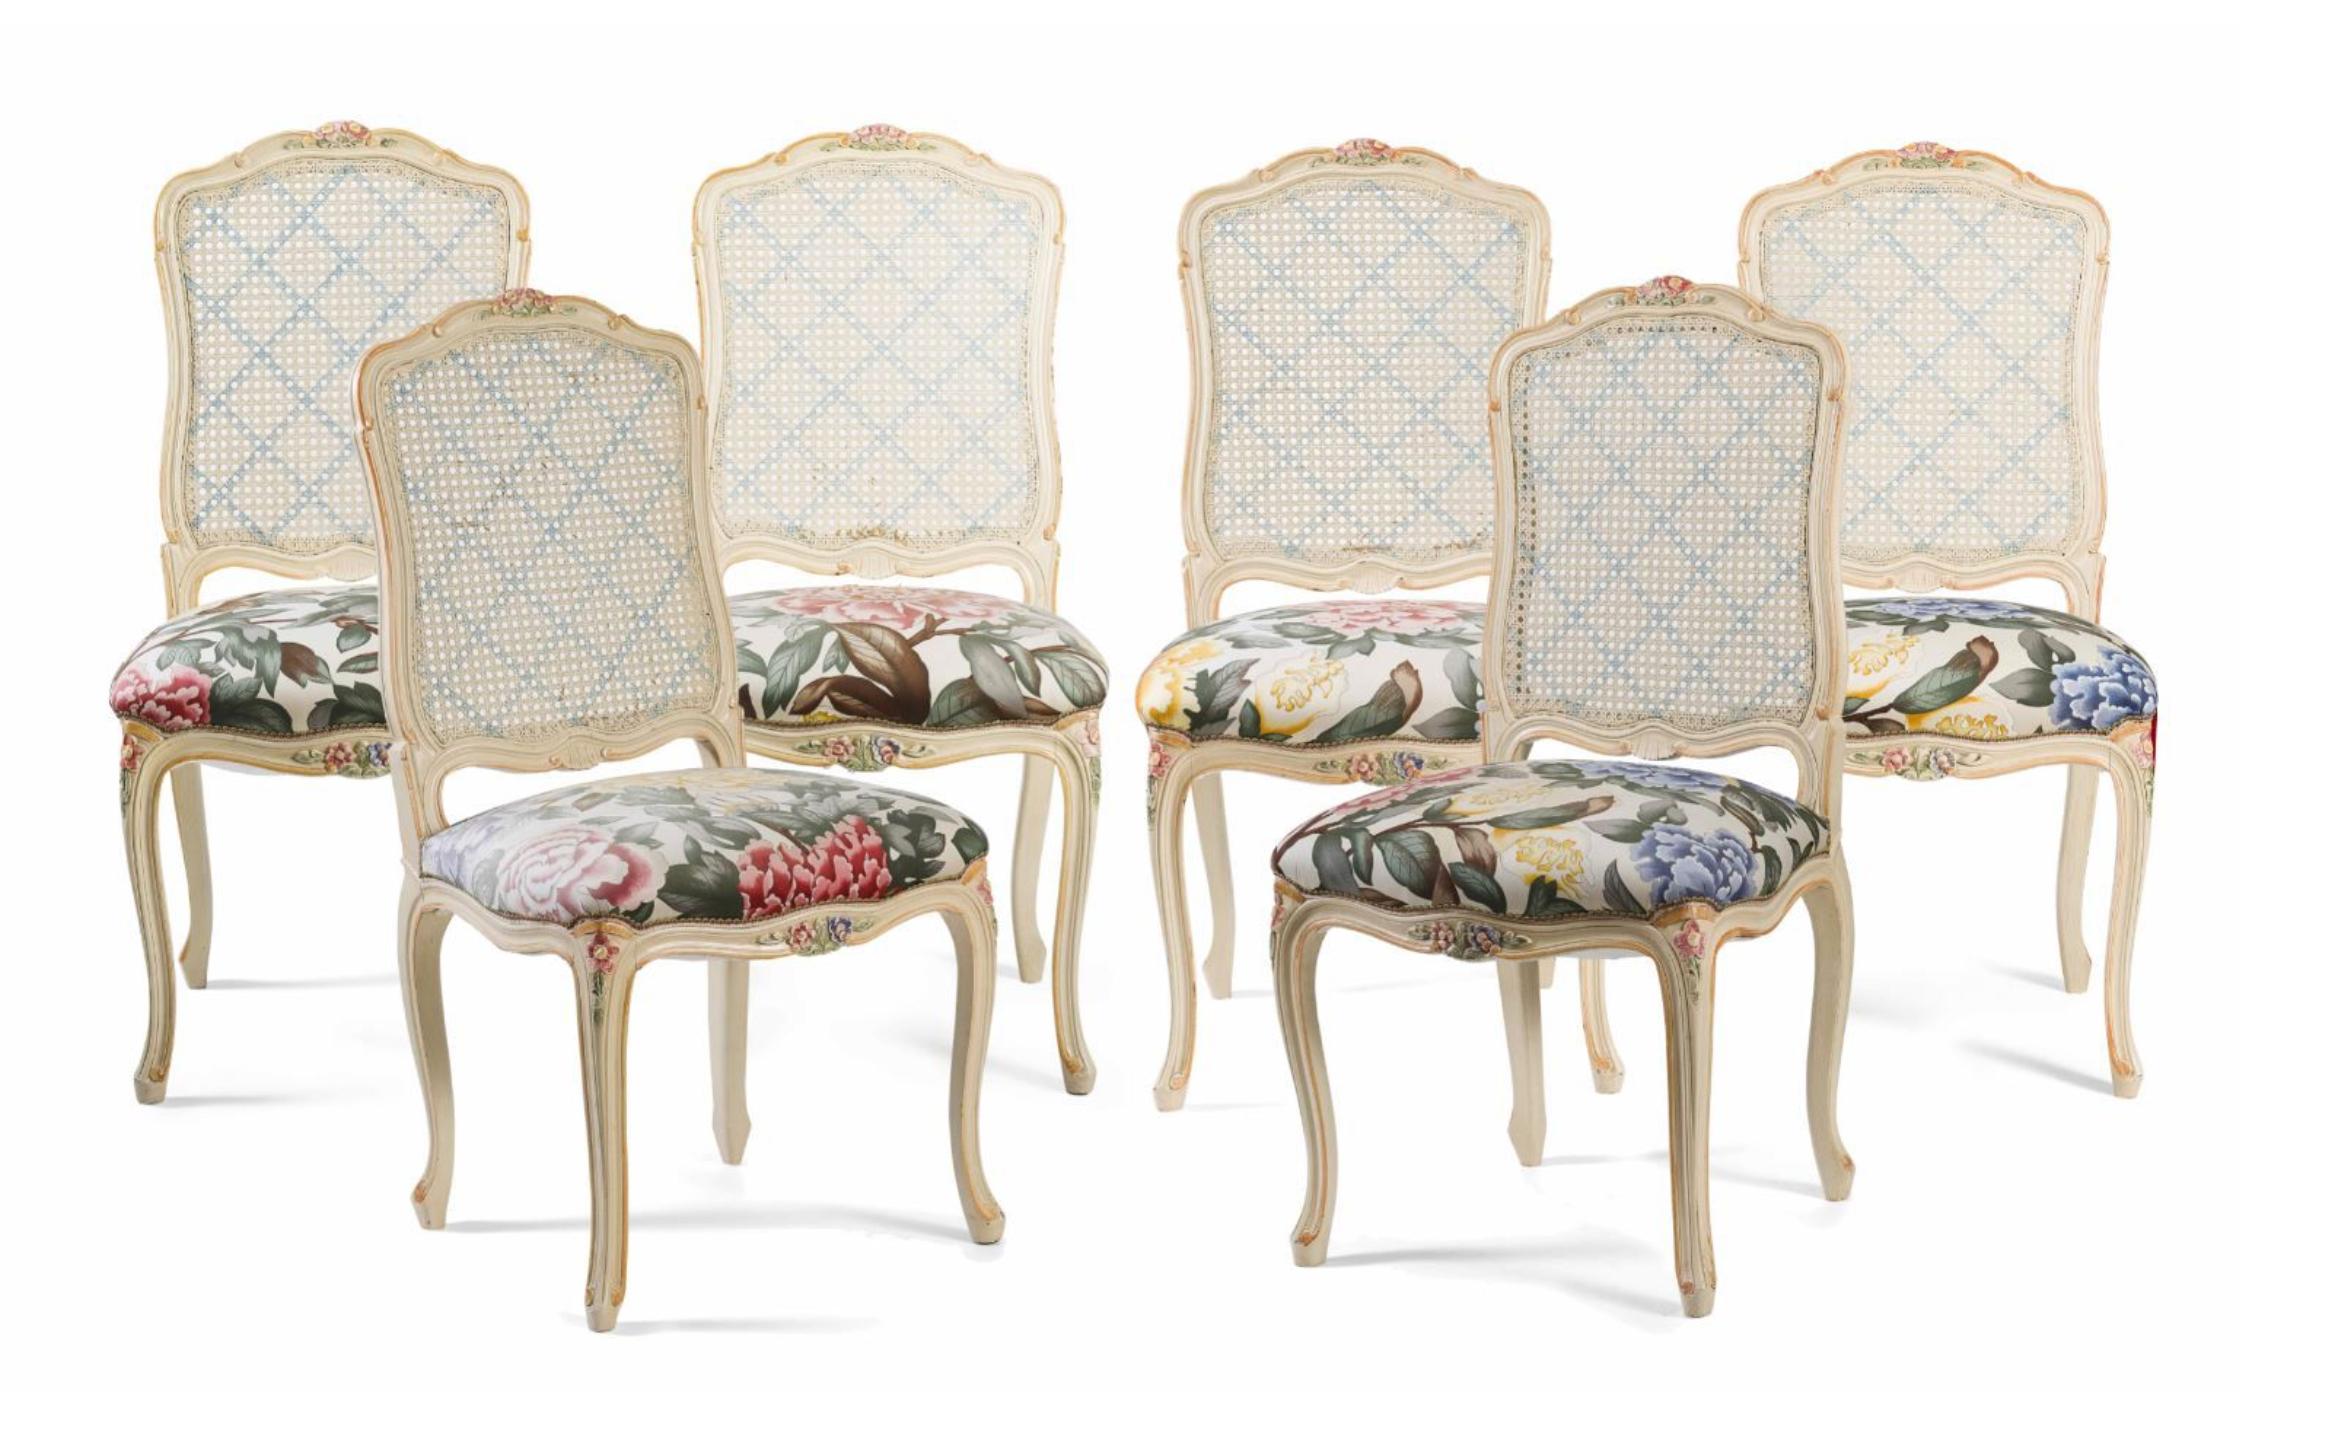 Six 19th century dining chairs in Louis XV style made of hand-painted wood with cane backs and upholstered very comfortable seat resting on elegantly shaped legs. 
Very good condition. Could be sold separately,
France, circa 1880.